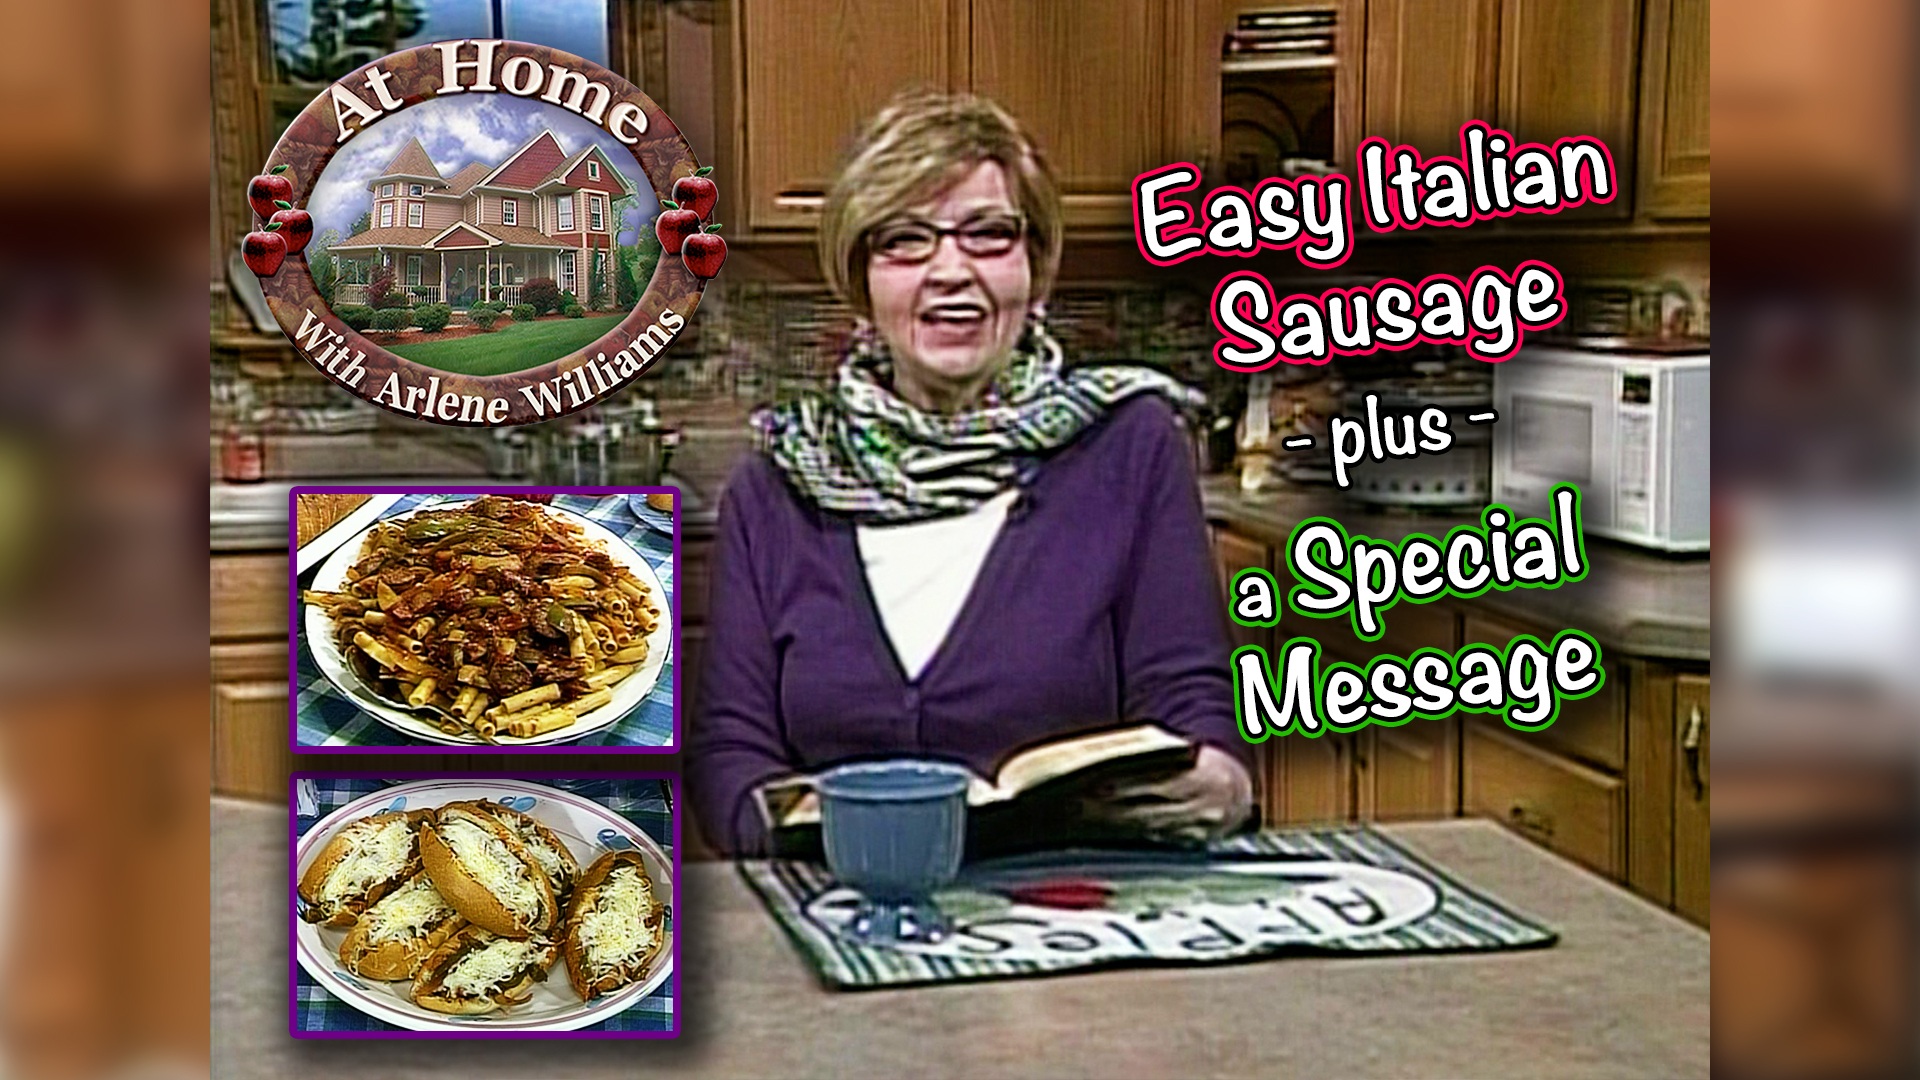 Arlene Makes Easy Italian Sausage and Shares a Special Message - At ...